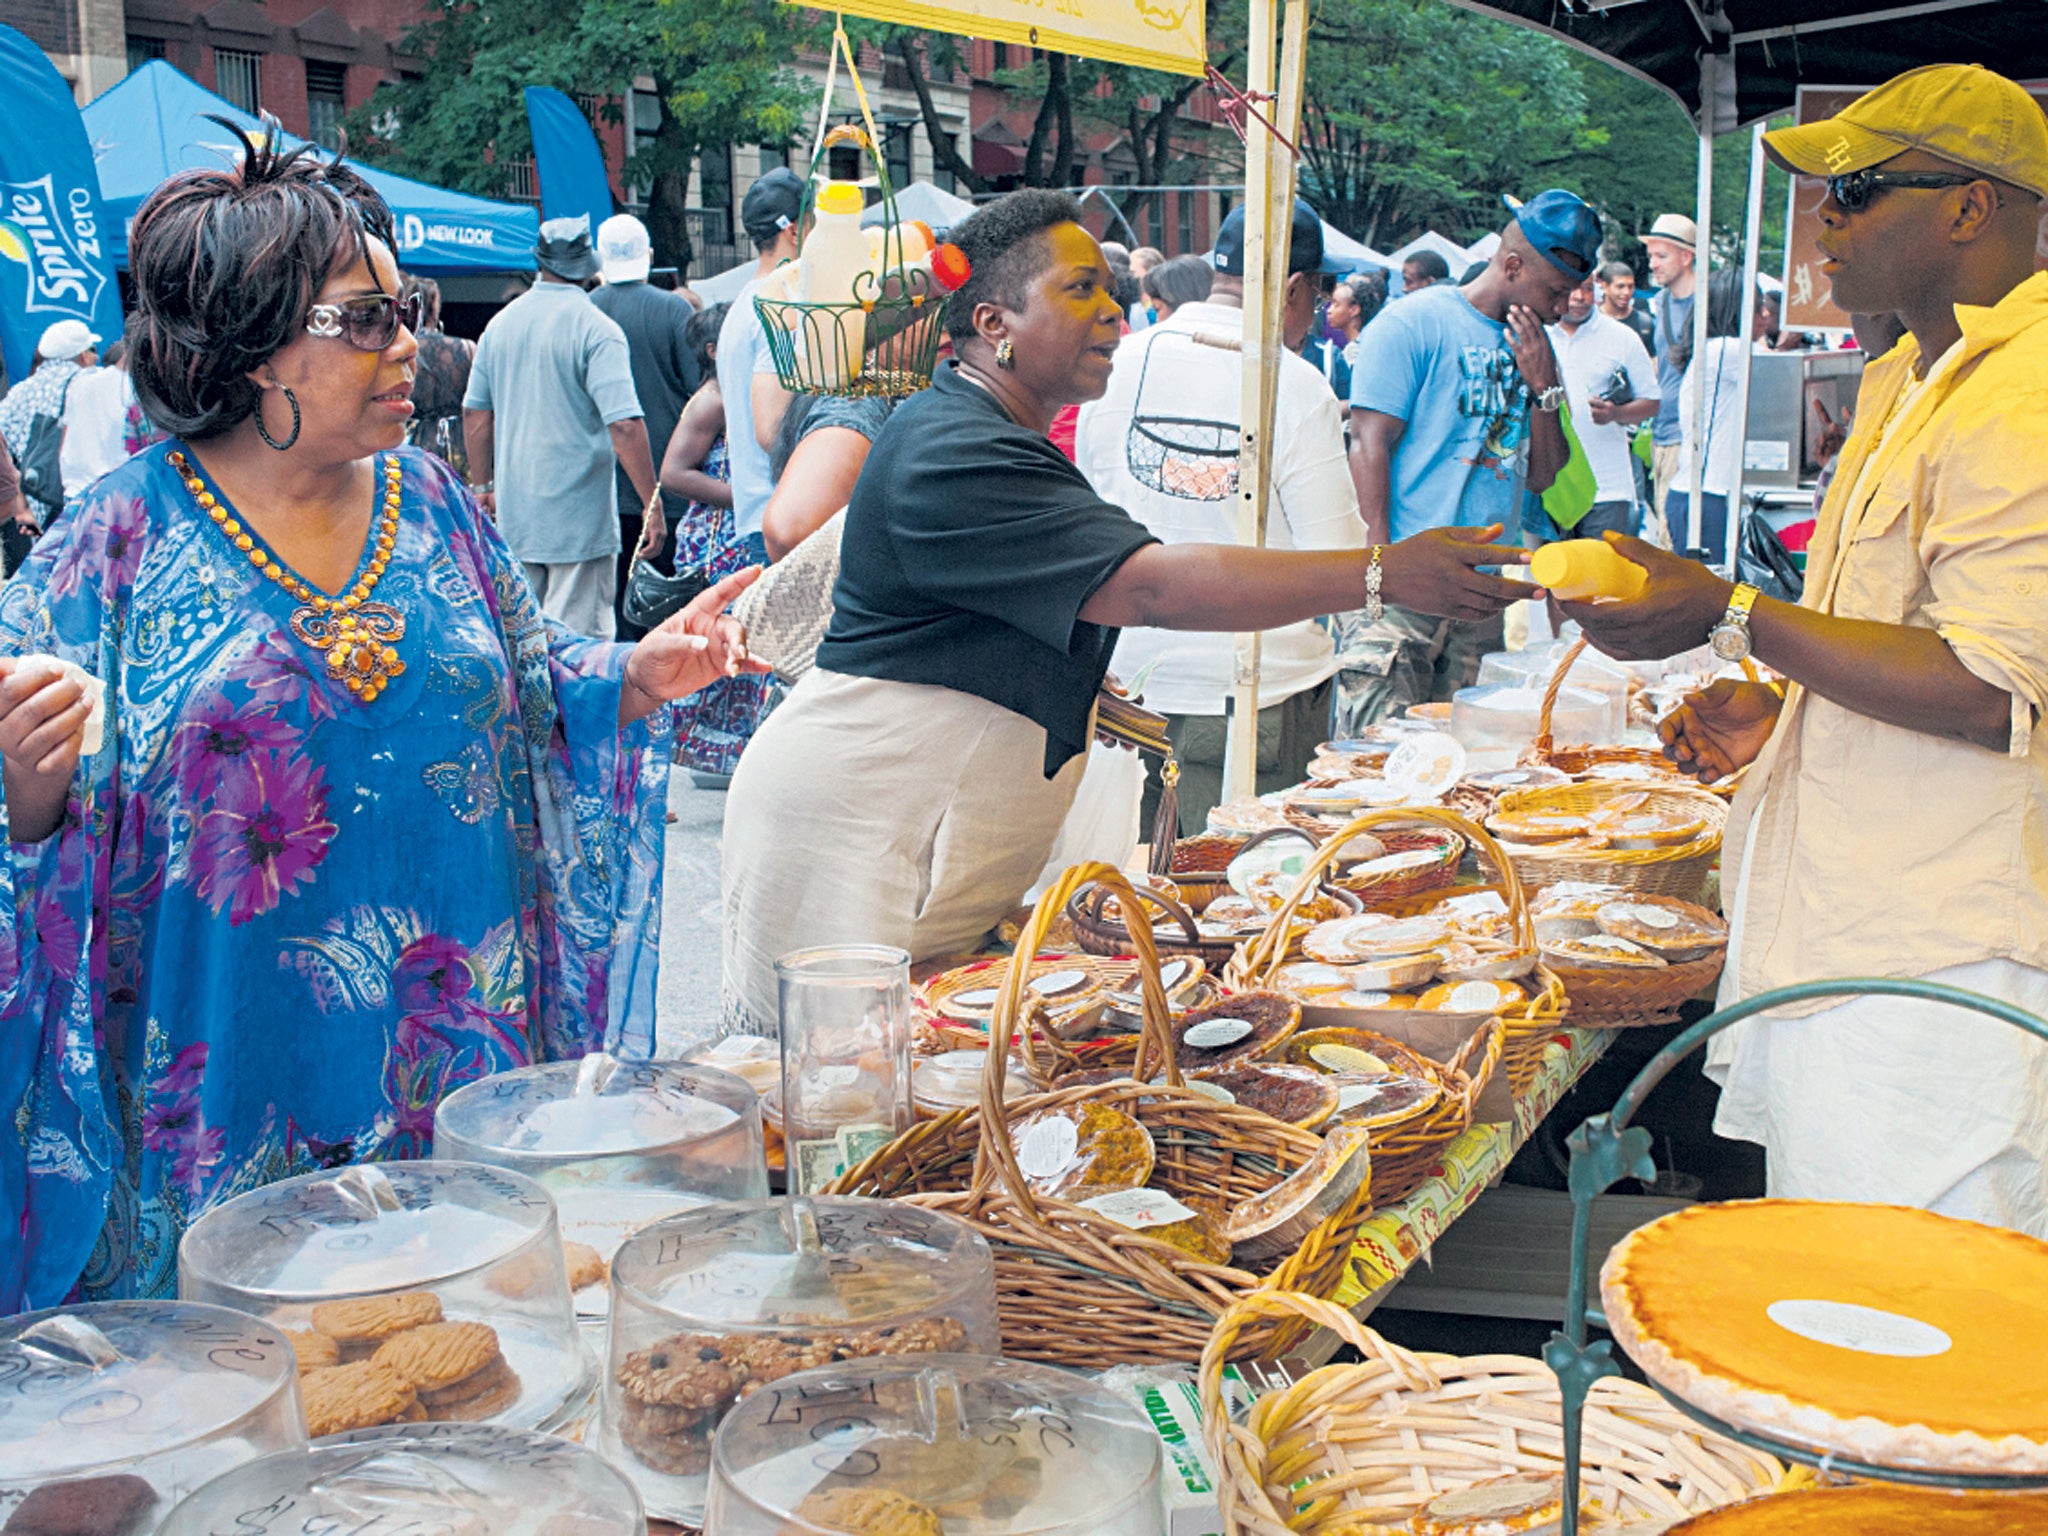 Rich pickings: a stall selling traditional food in Harlem